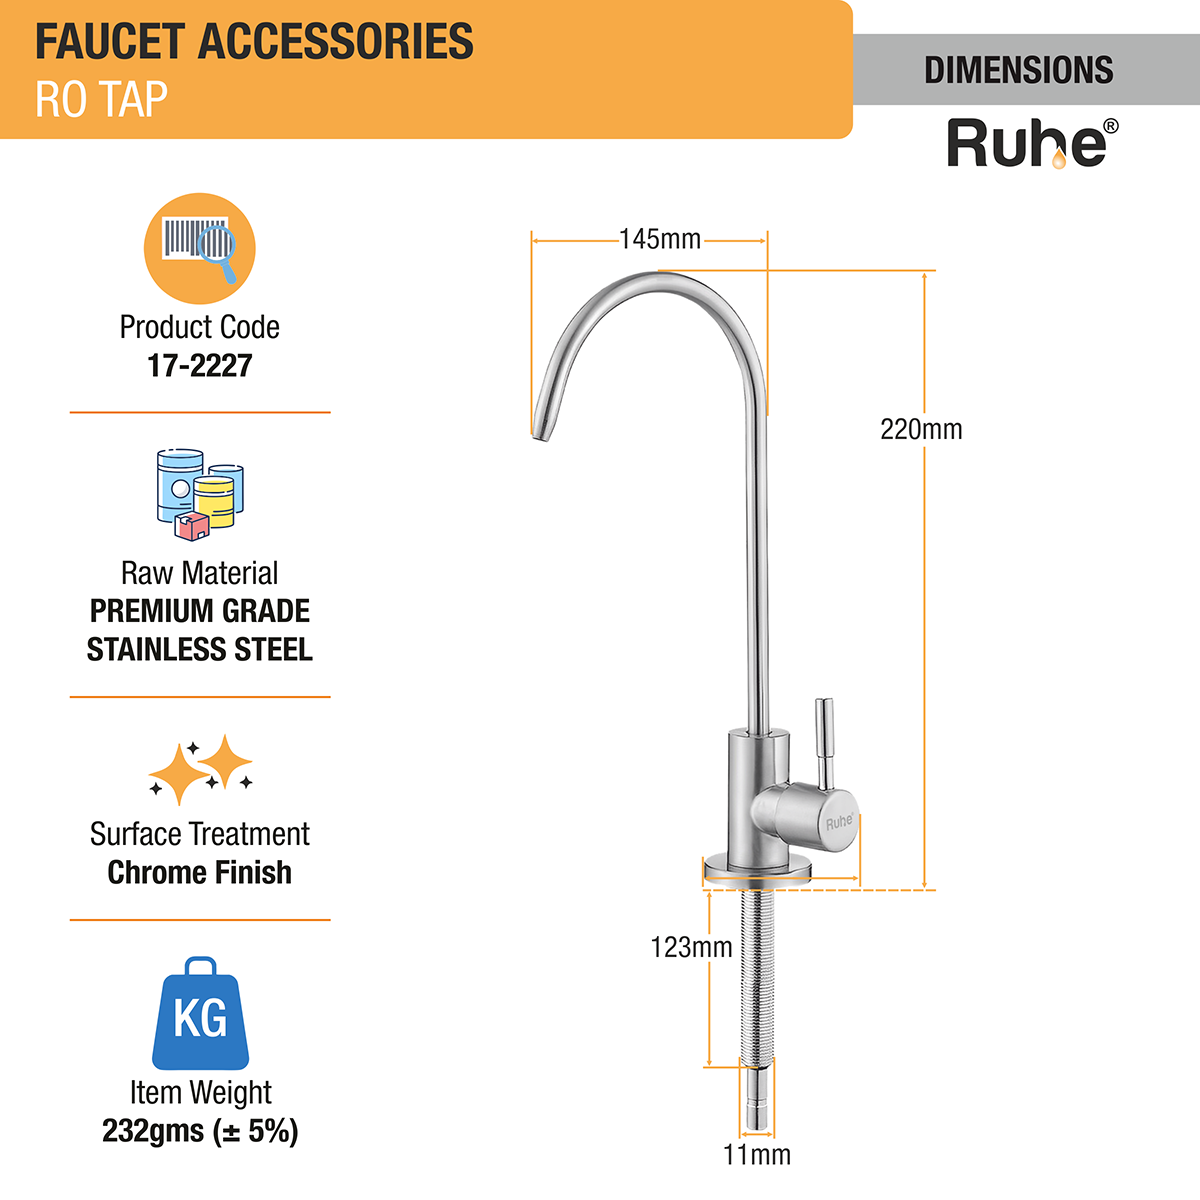 RO Tap/Faucet (Premium Stainless Steel) dimensions and sizes